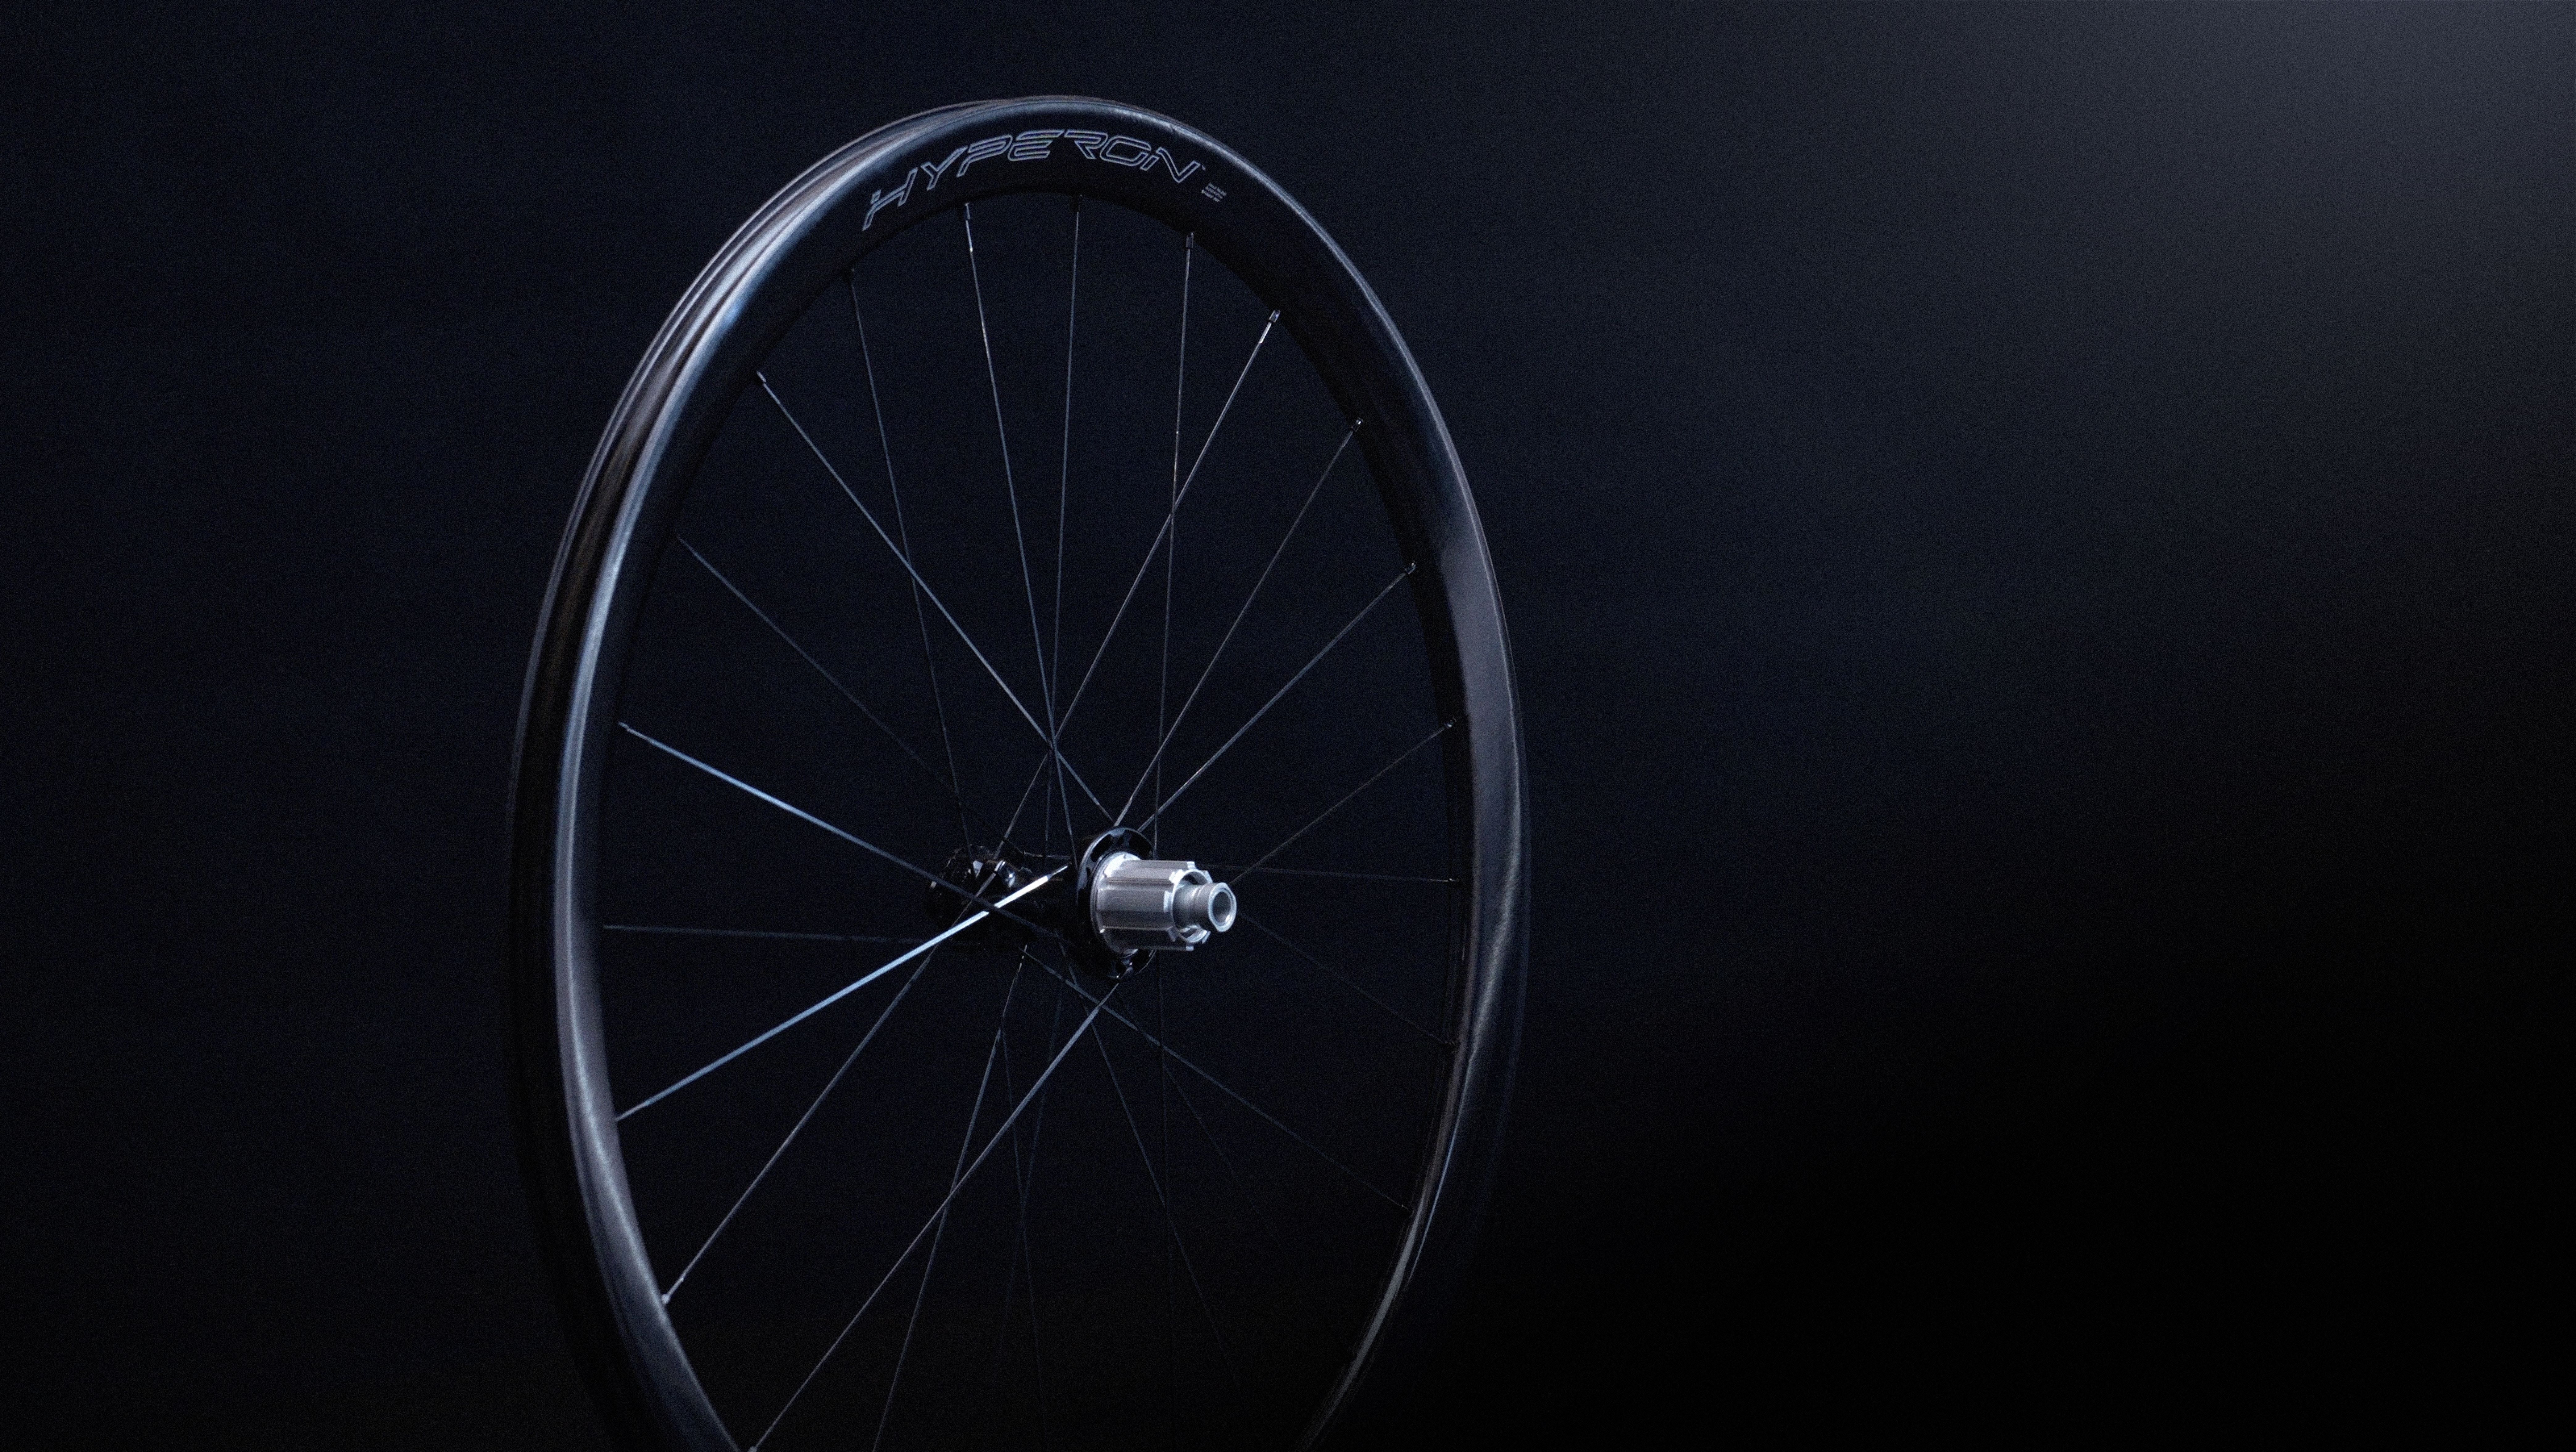 New Hyperon: Campagnolo expands the range of ultra light and high performance wheelset